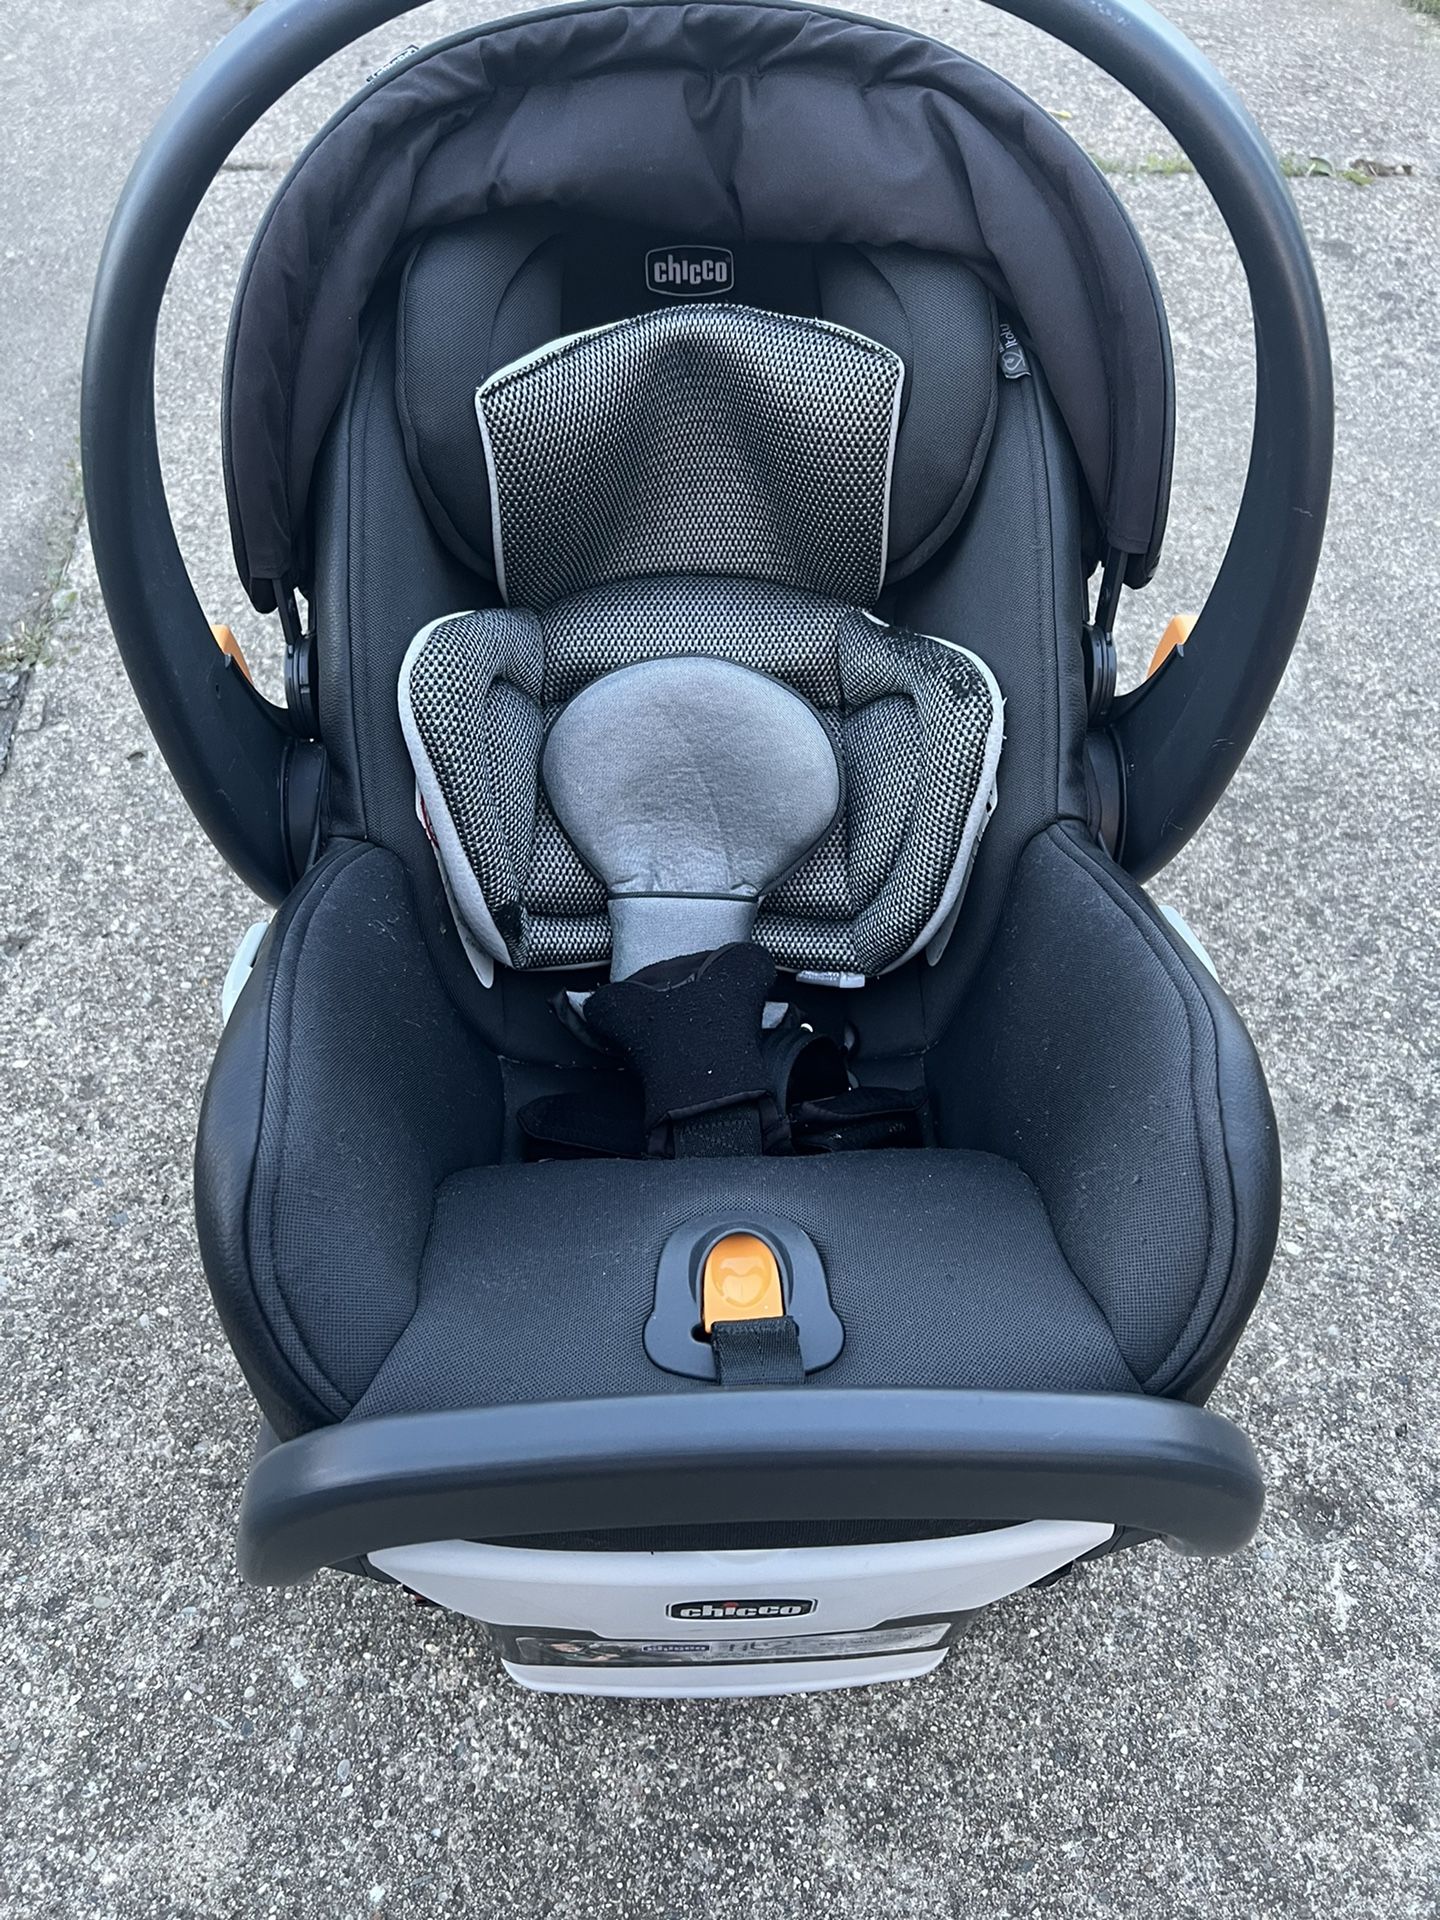 Chicco Fit 2 Infant & Toddler Car Seat